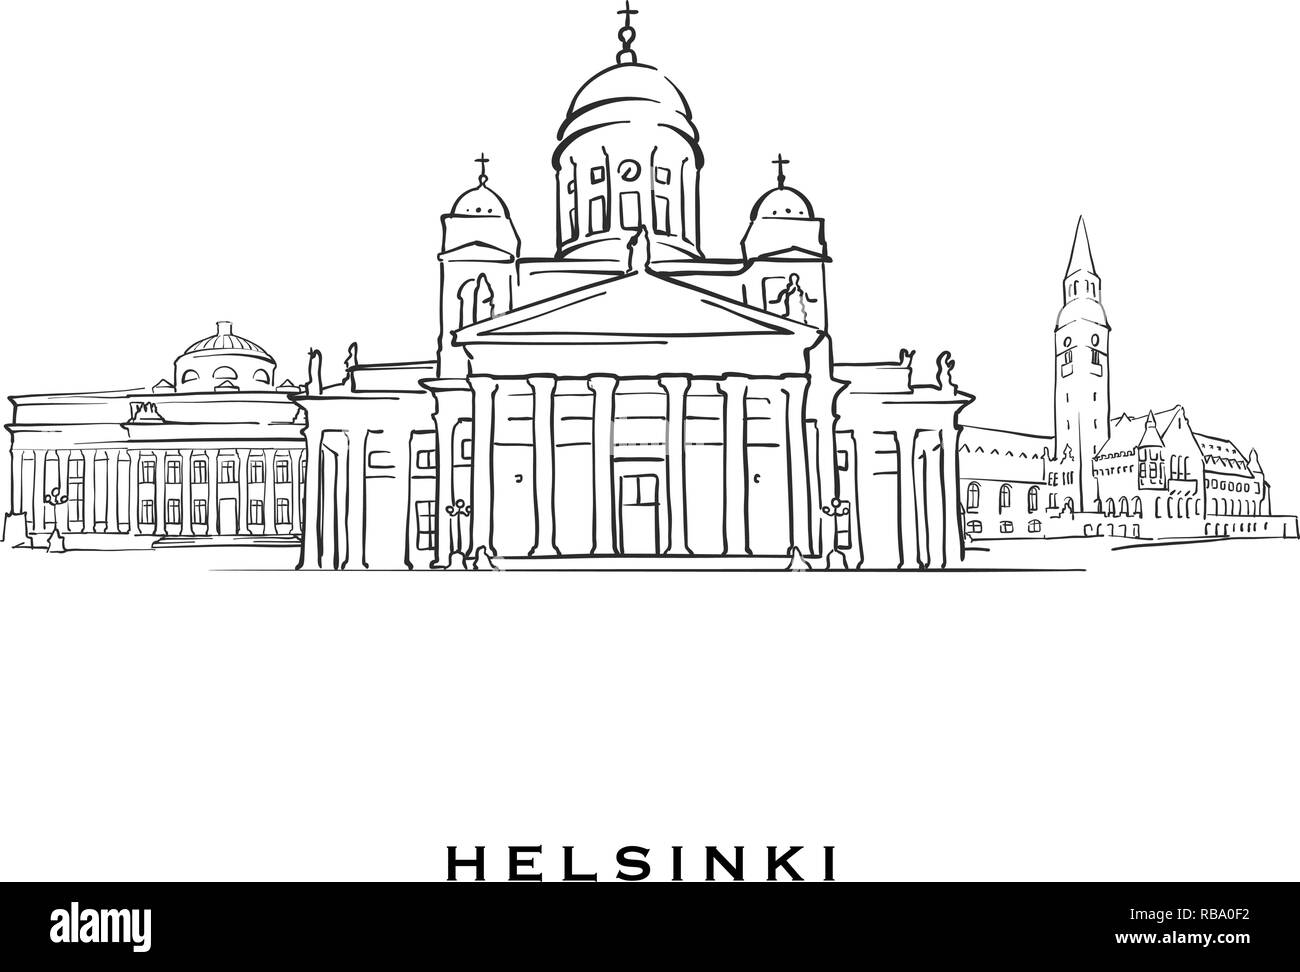 Helsinki Finland famous architecture. Outlined vector sketch separated on white background. Architecture drawings of all European capitals. Stock Vector